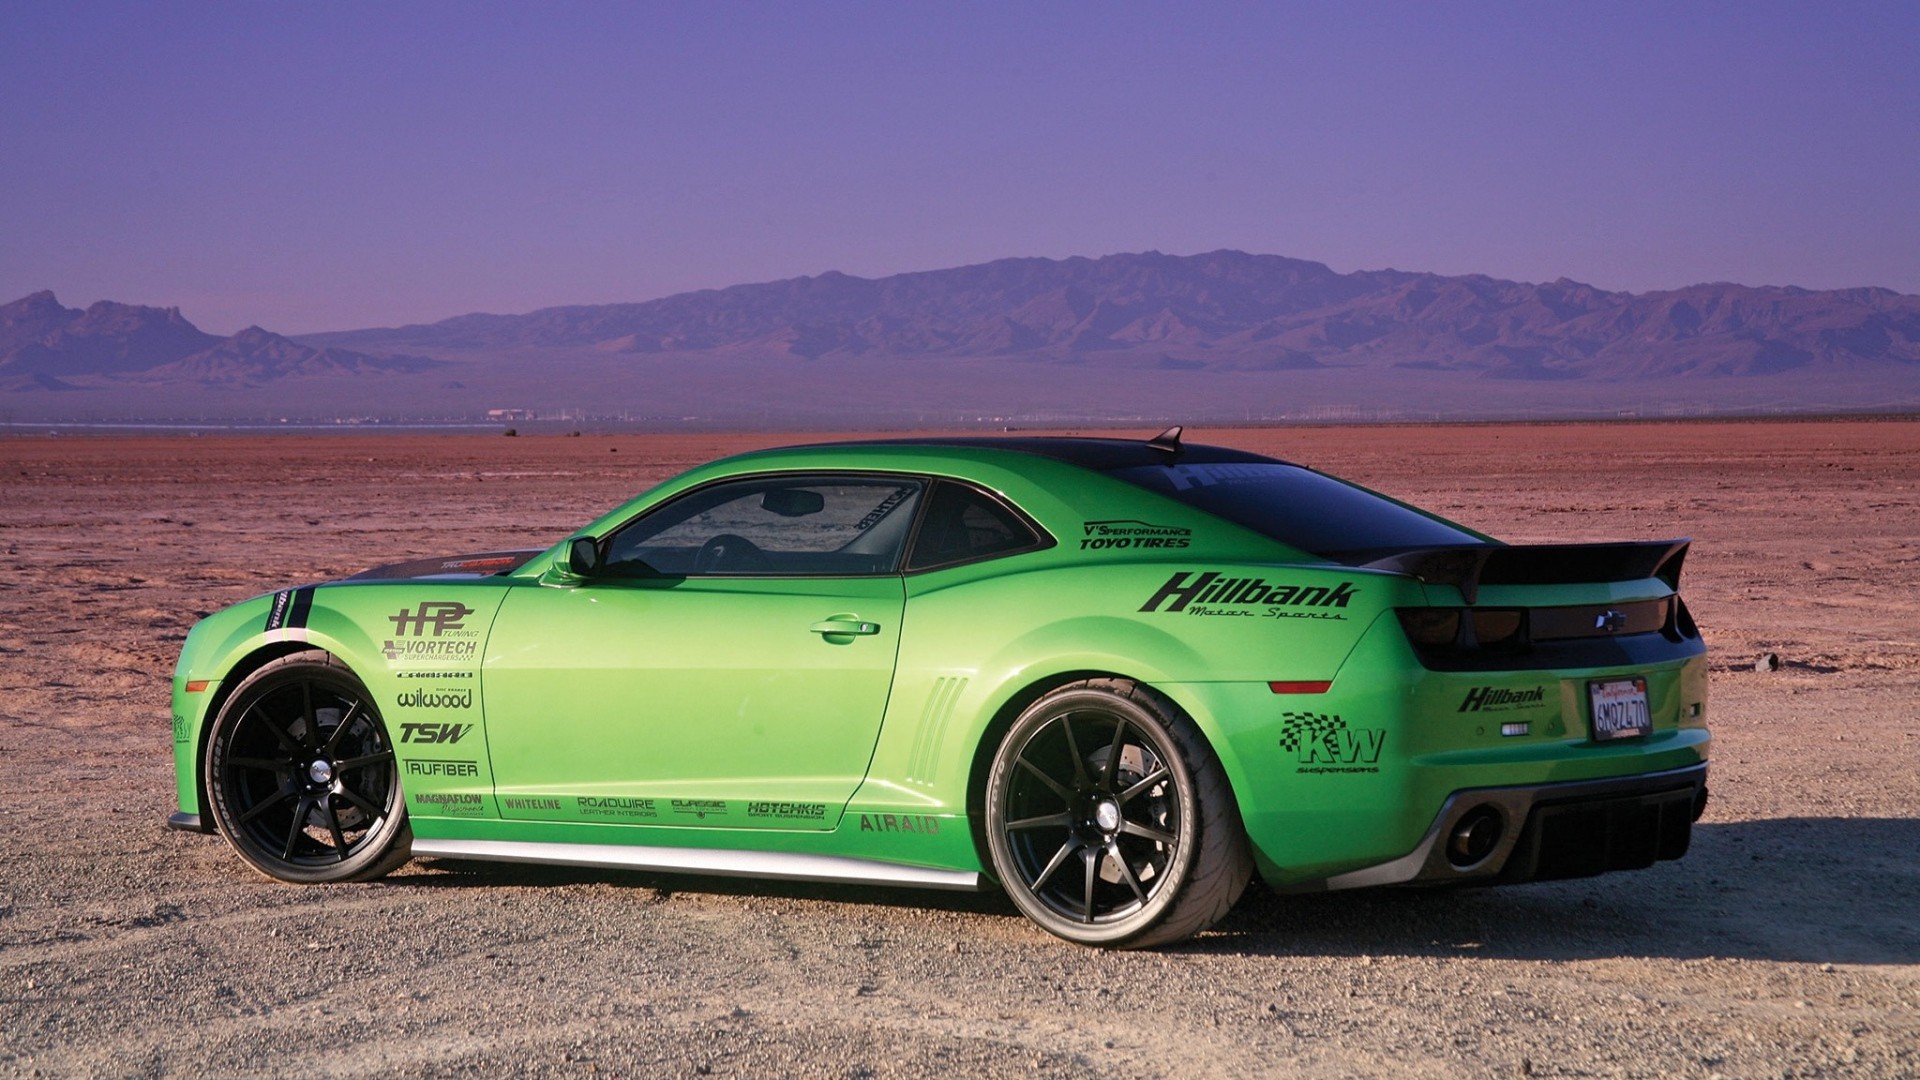 General 1920x1080 car vehicle green cars Chevrolet Chevrolet Camaro muscle cars American cars